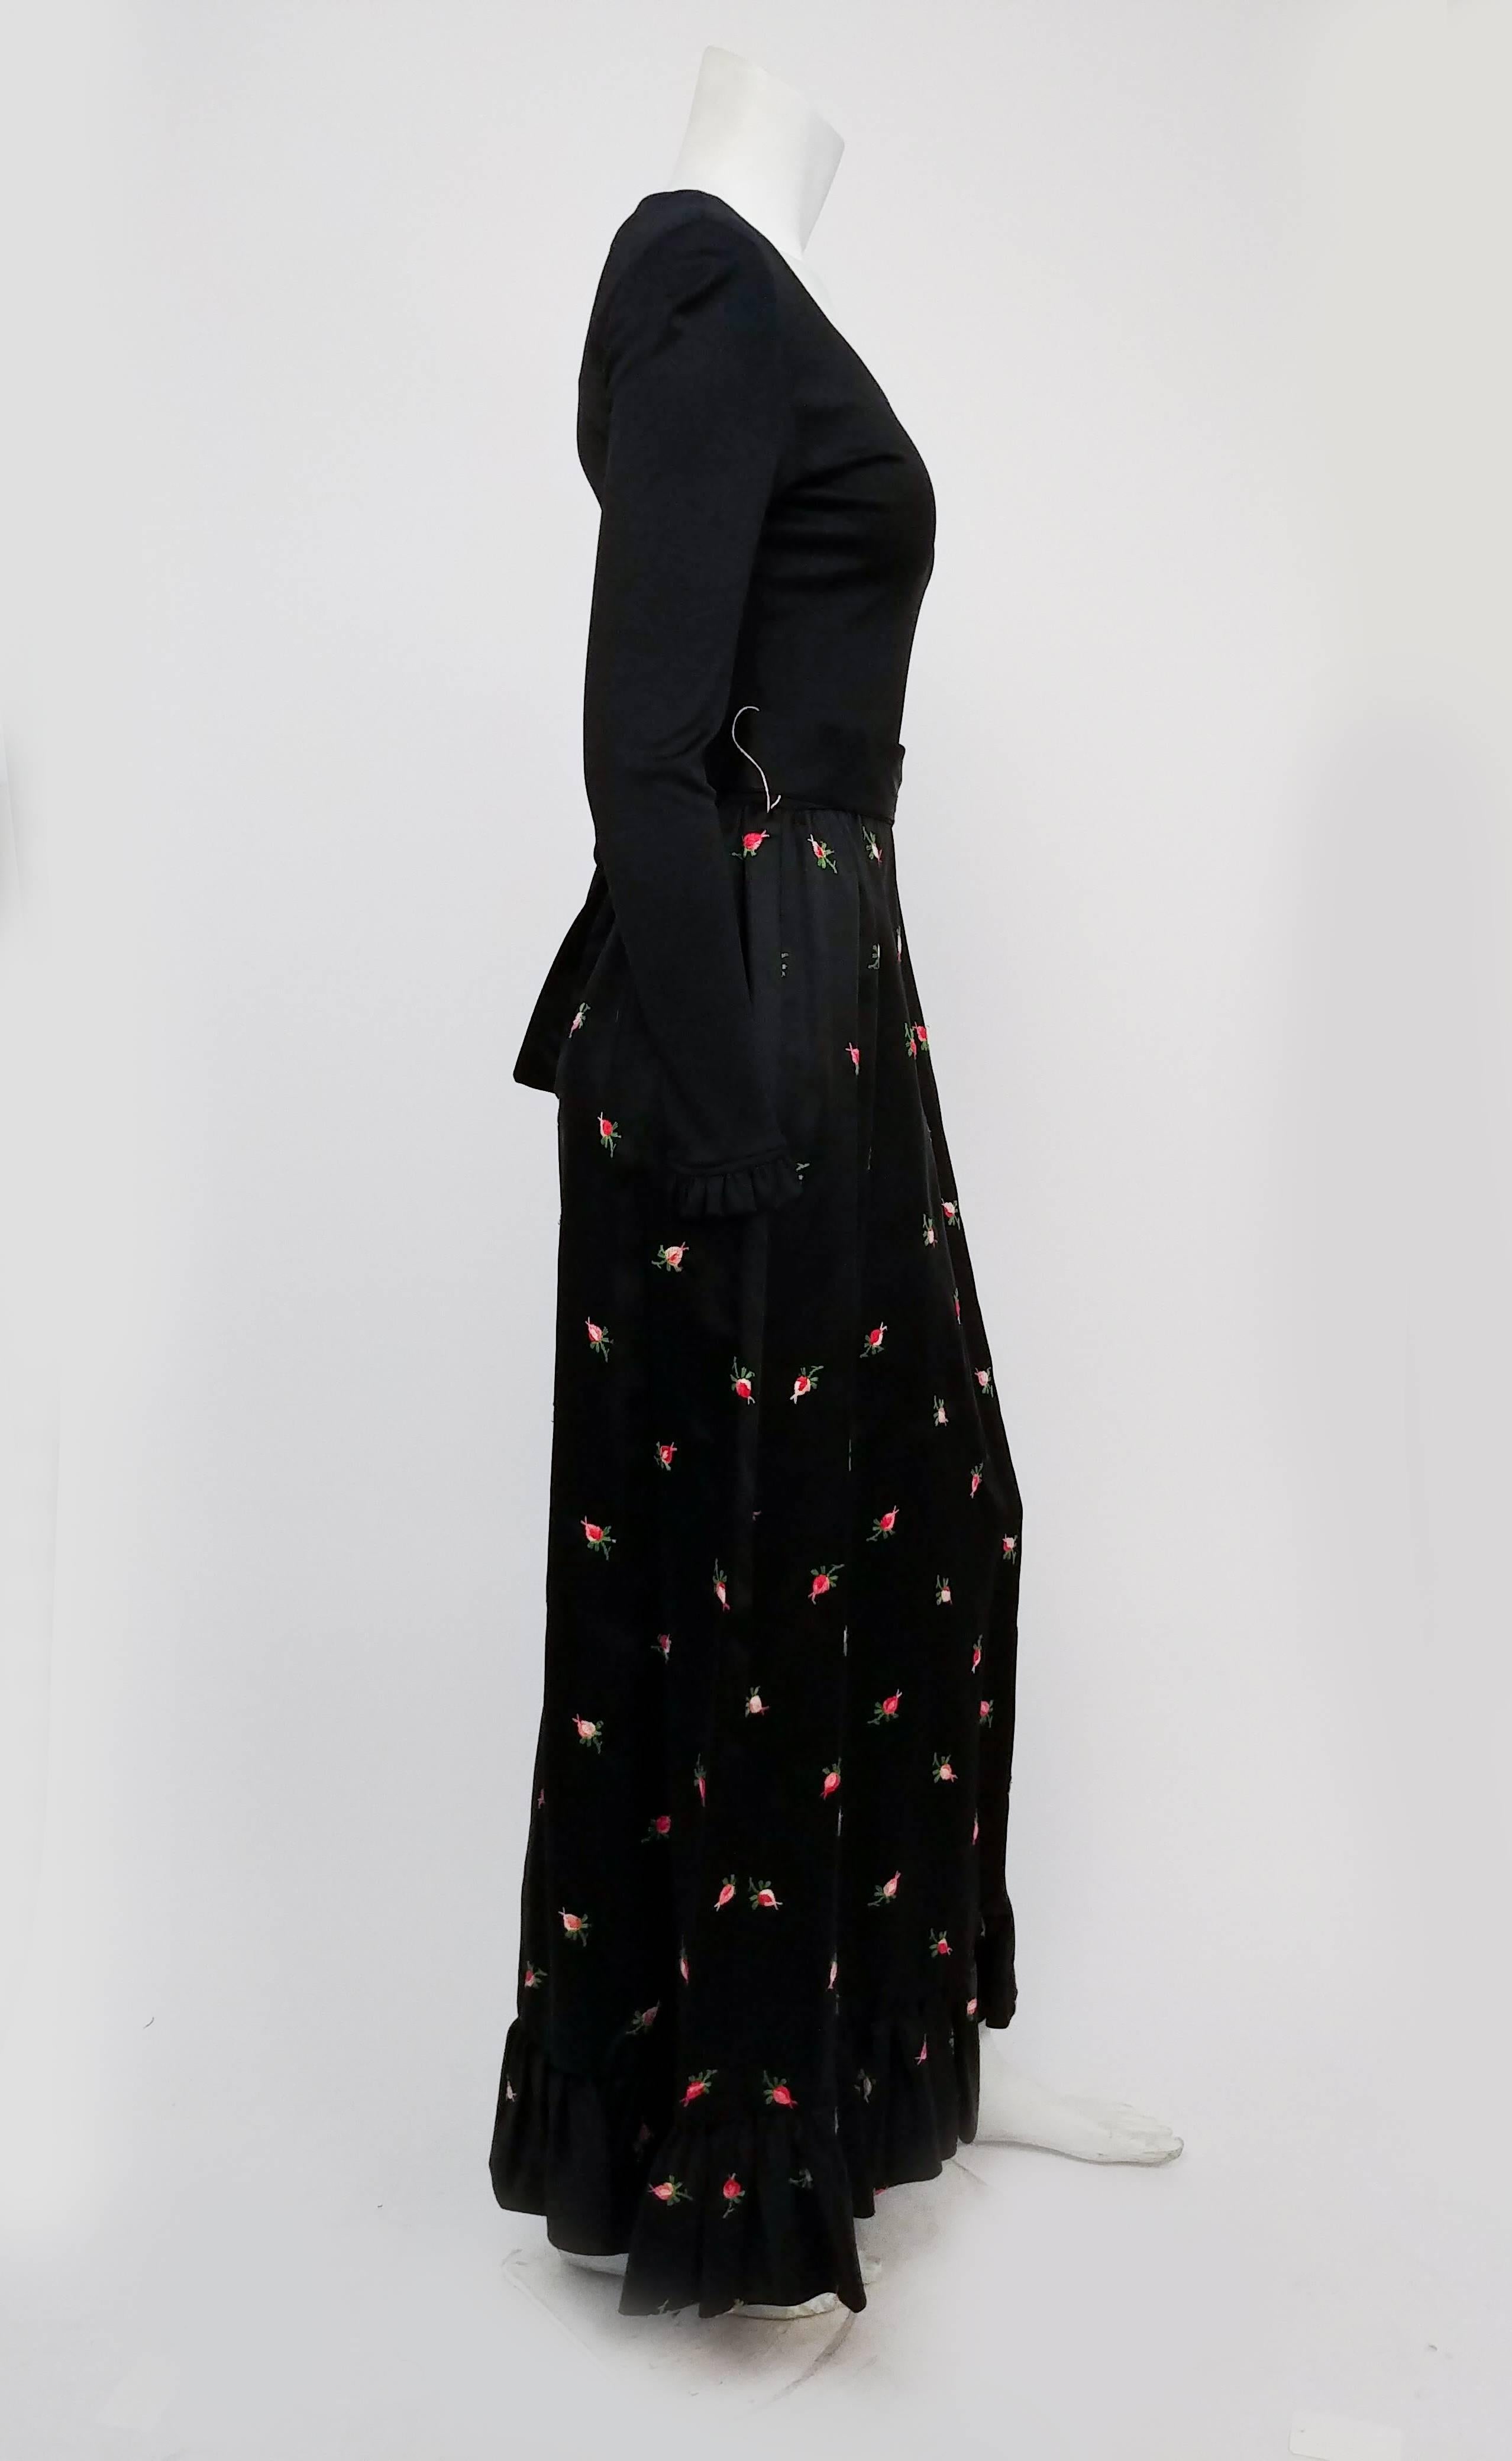 Joseph Magnin Embroidered Satin & Jersey Evening Dress, 1960s. Maxi-length evening dress with knit jersey bodice belted at waist with satin sash, and satin skirt embroidered with pink roses. 